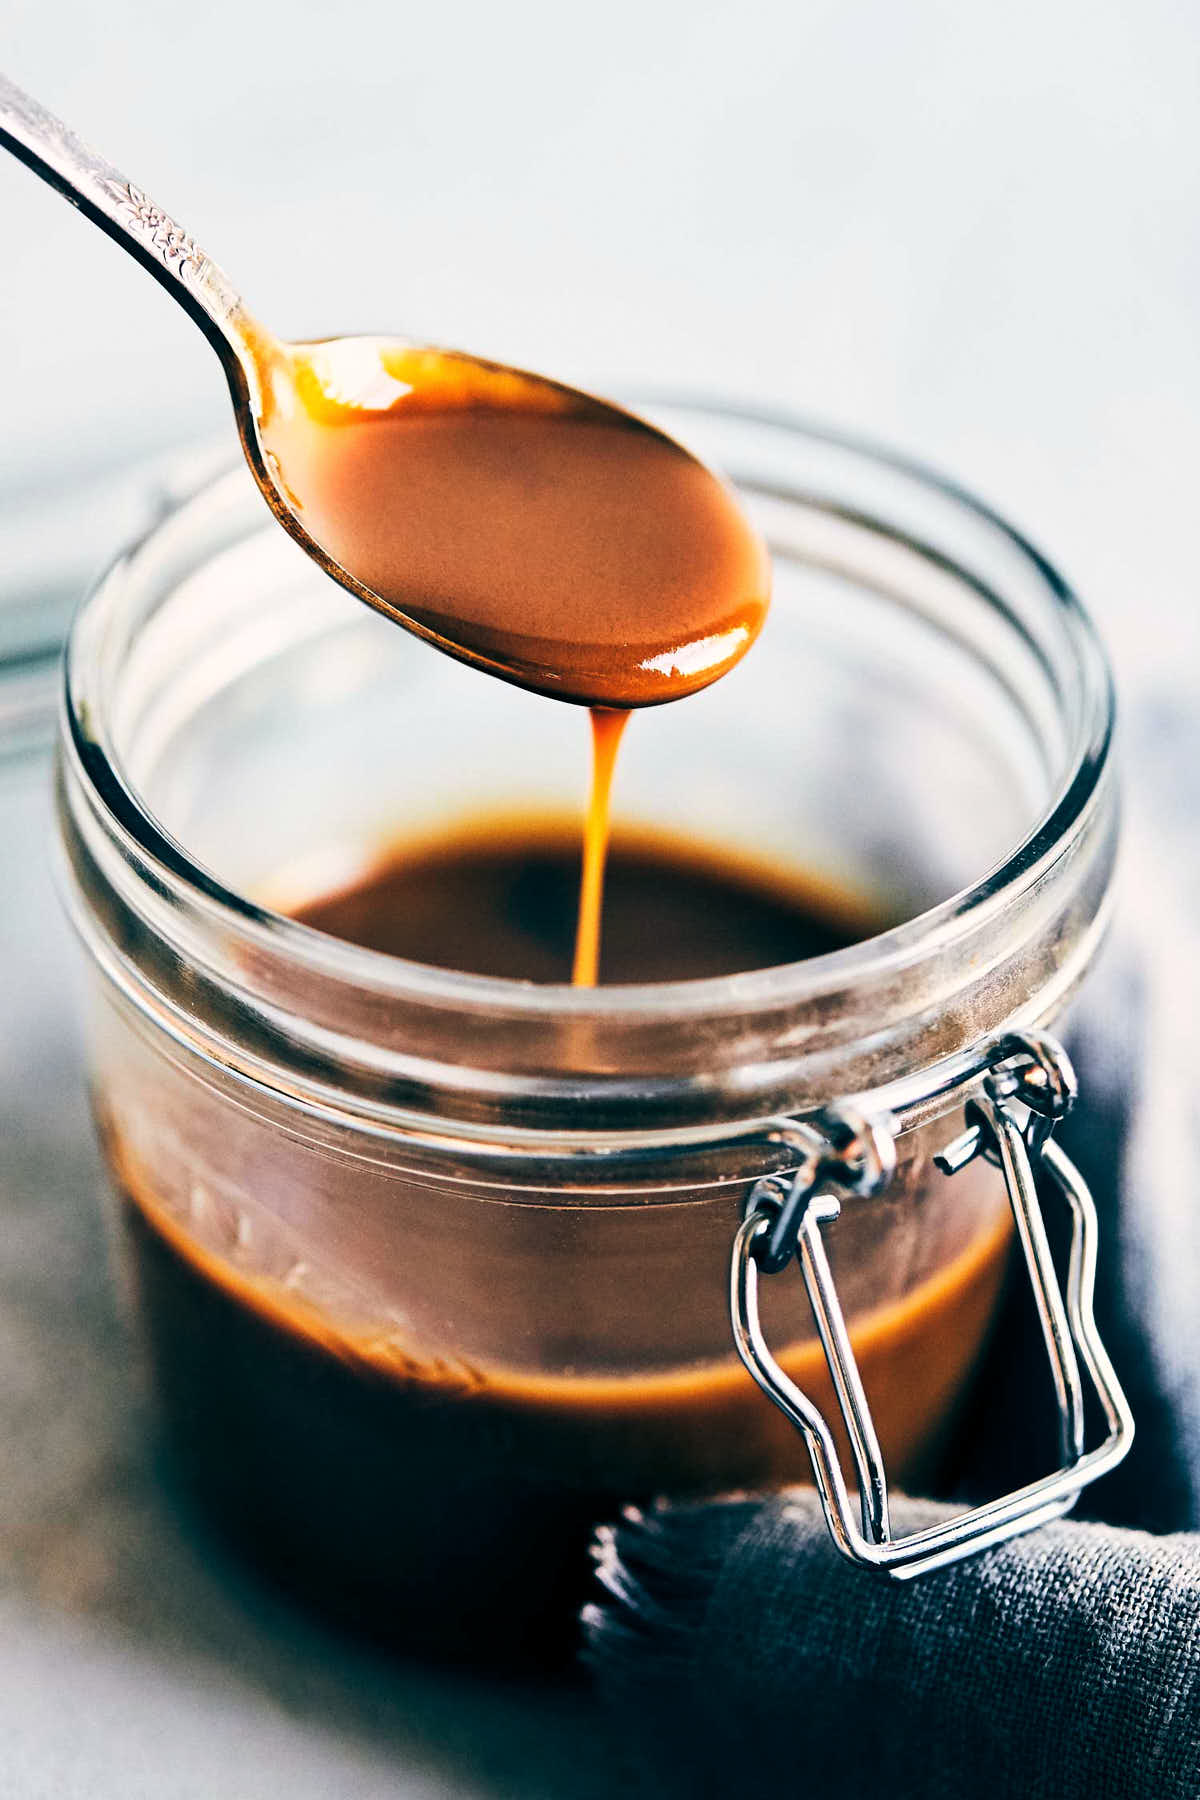 Salted caramel texture in a jar with a spoon